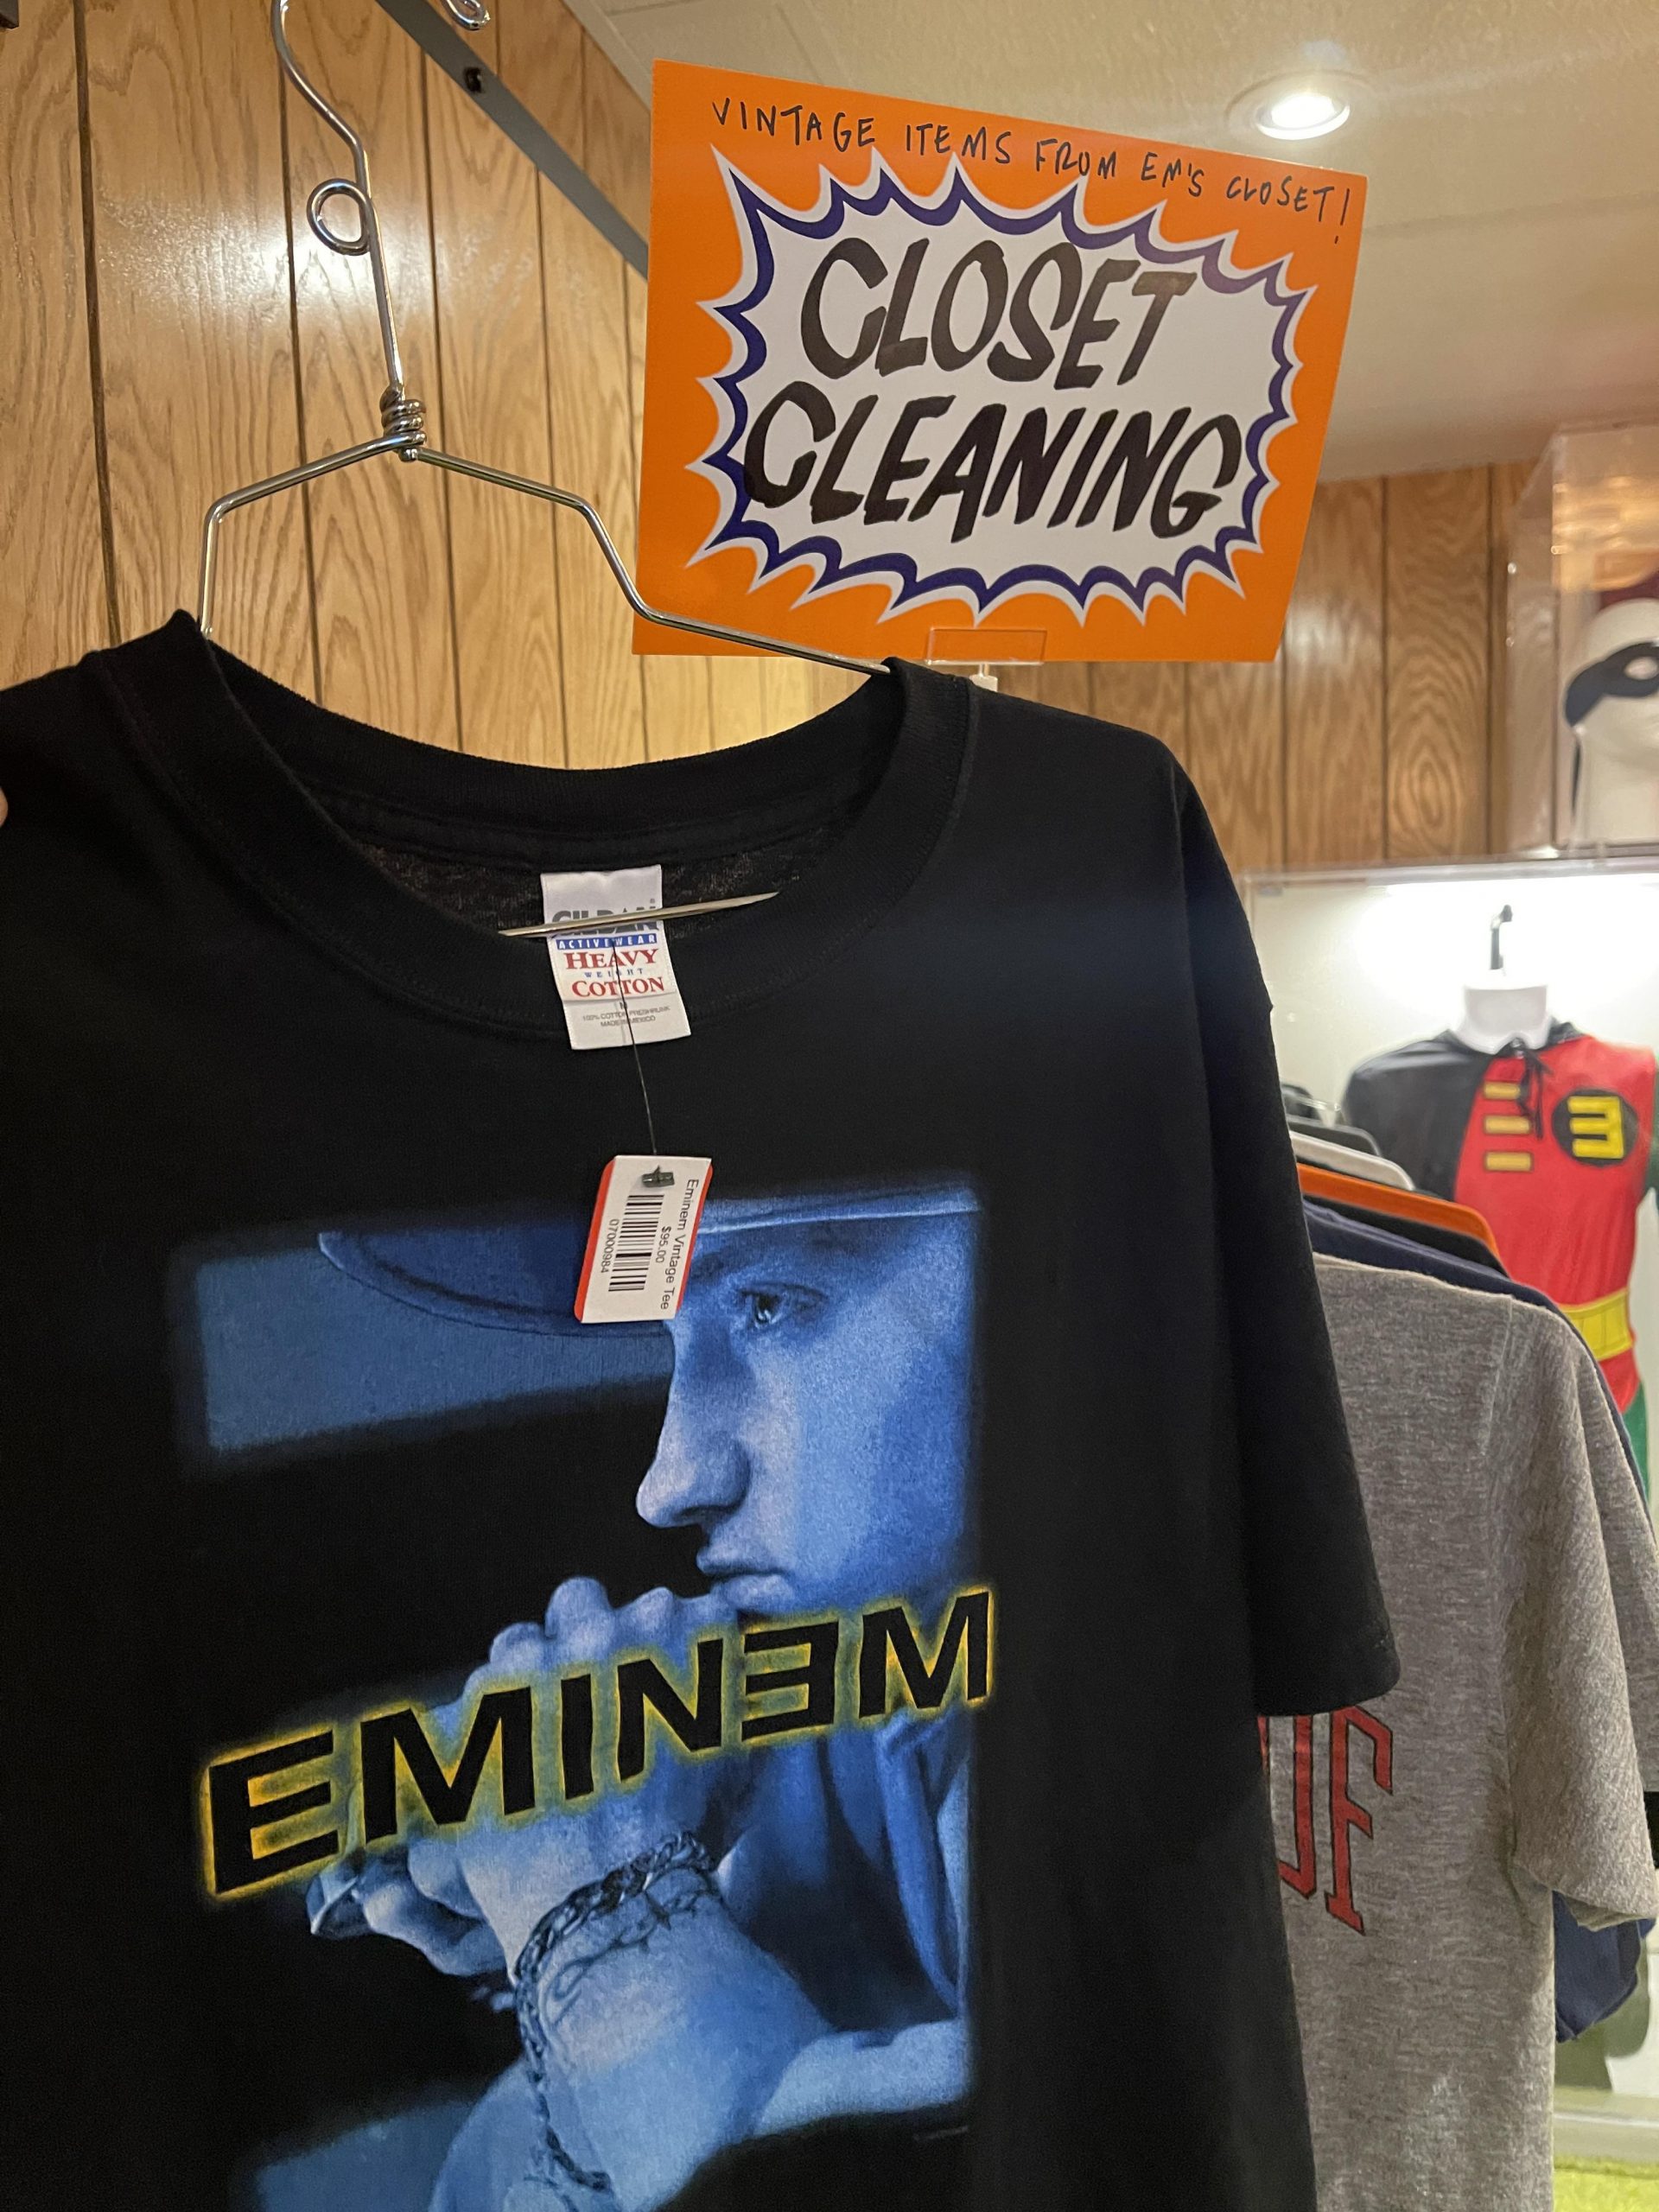 Virtual Tour Around The Trailer, Store for Eminem Fans